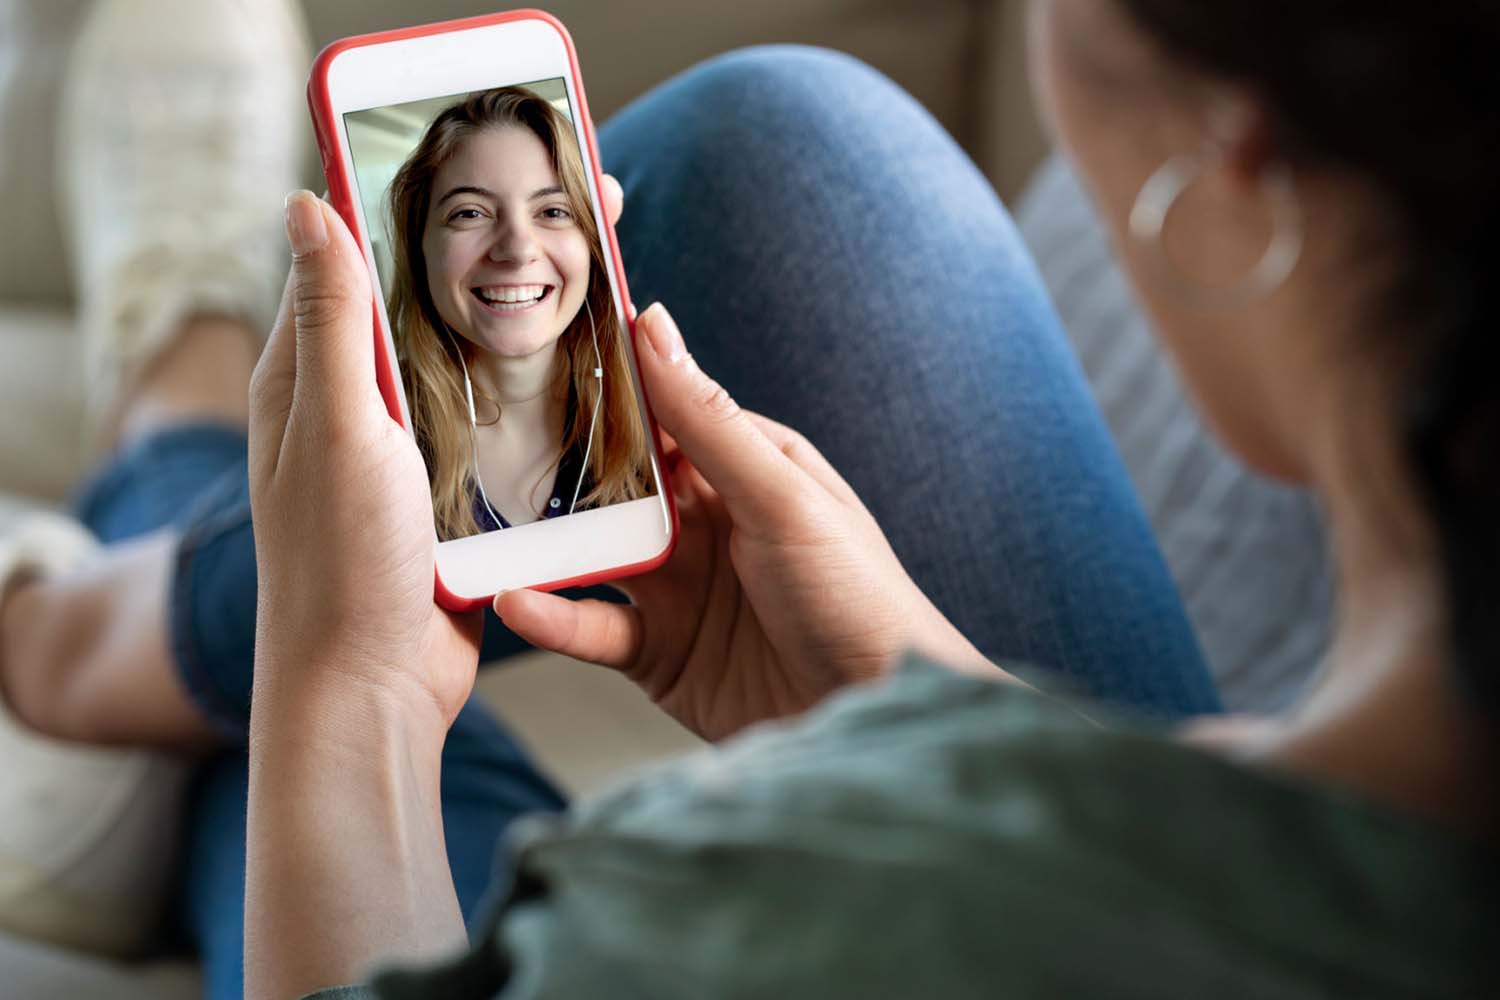 Two women on video call with each other